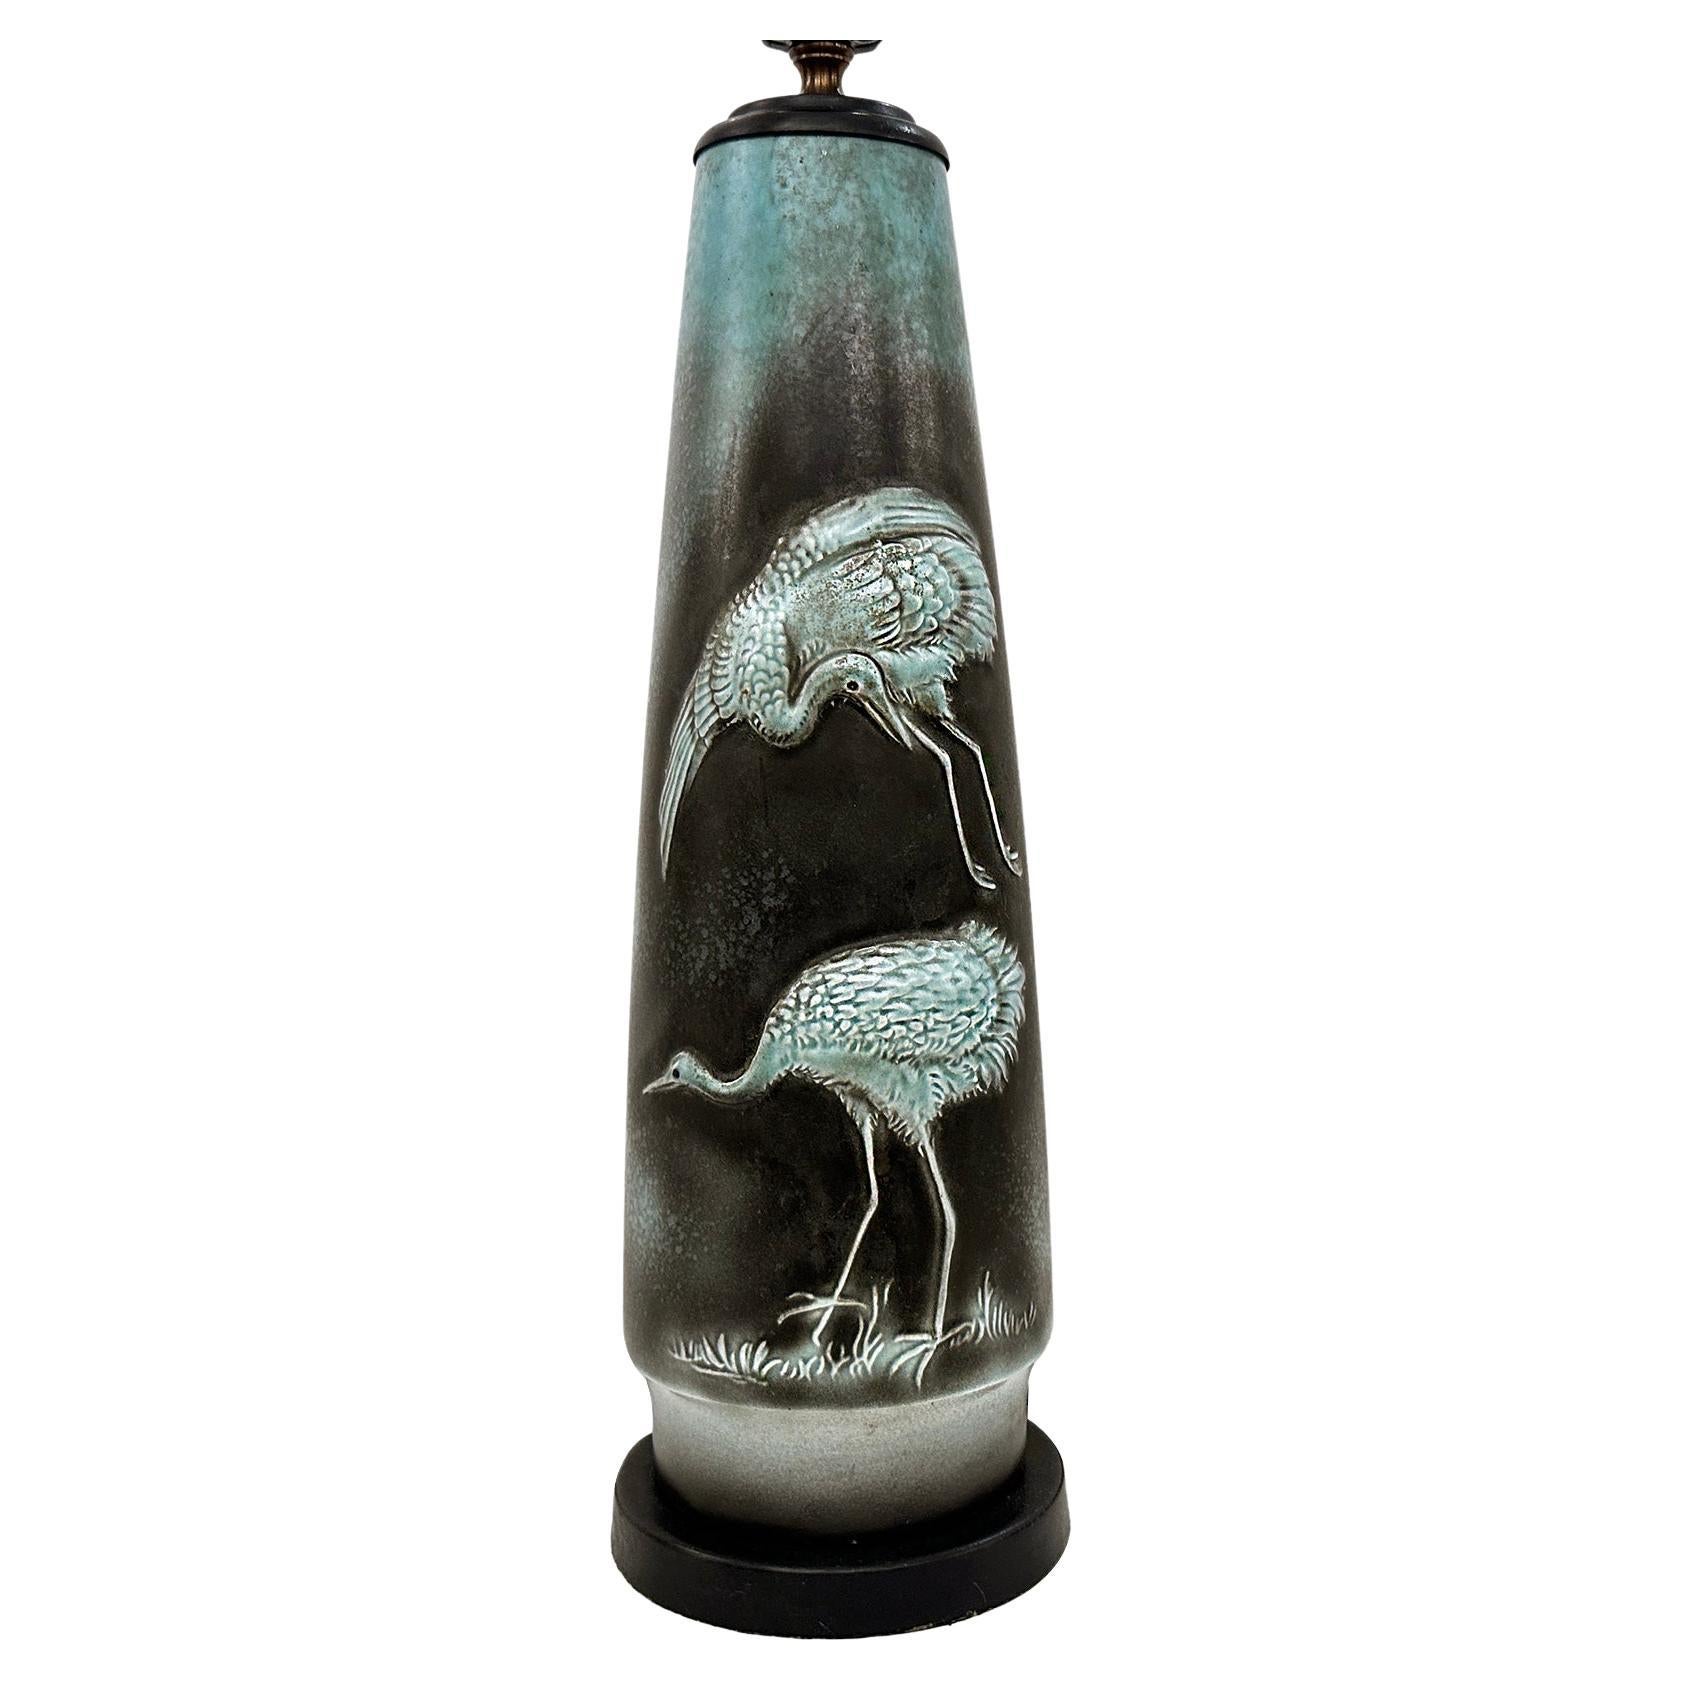 A circa 1950's French enameled metal lamp with birds motif.

Measurements:
Height of body:17